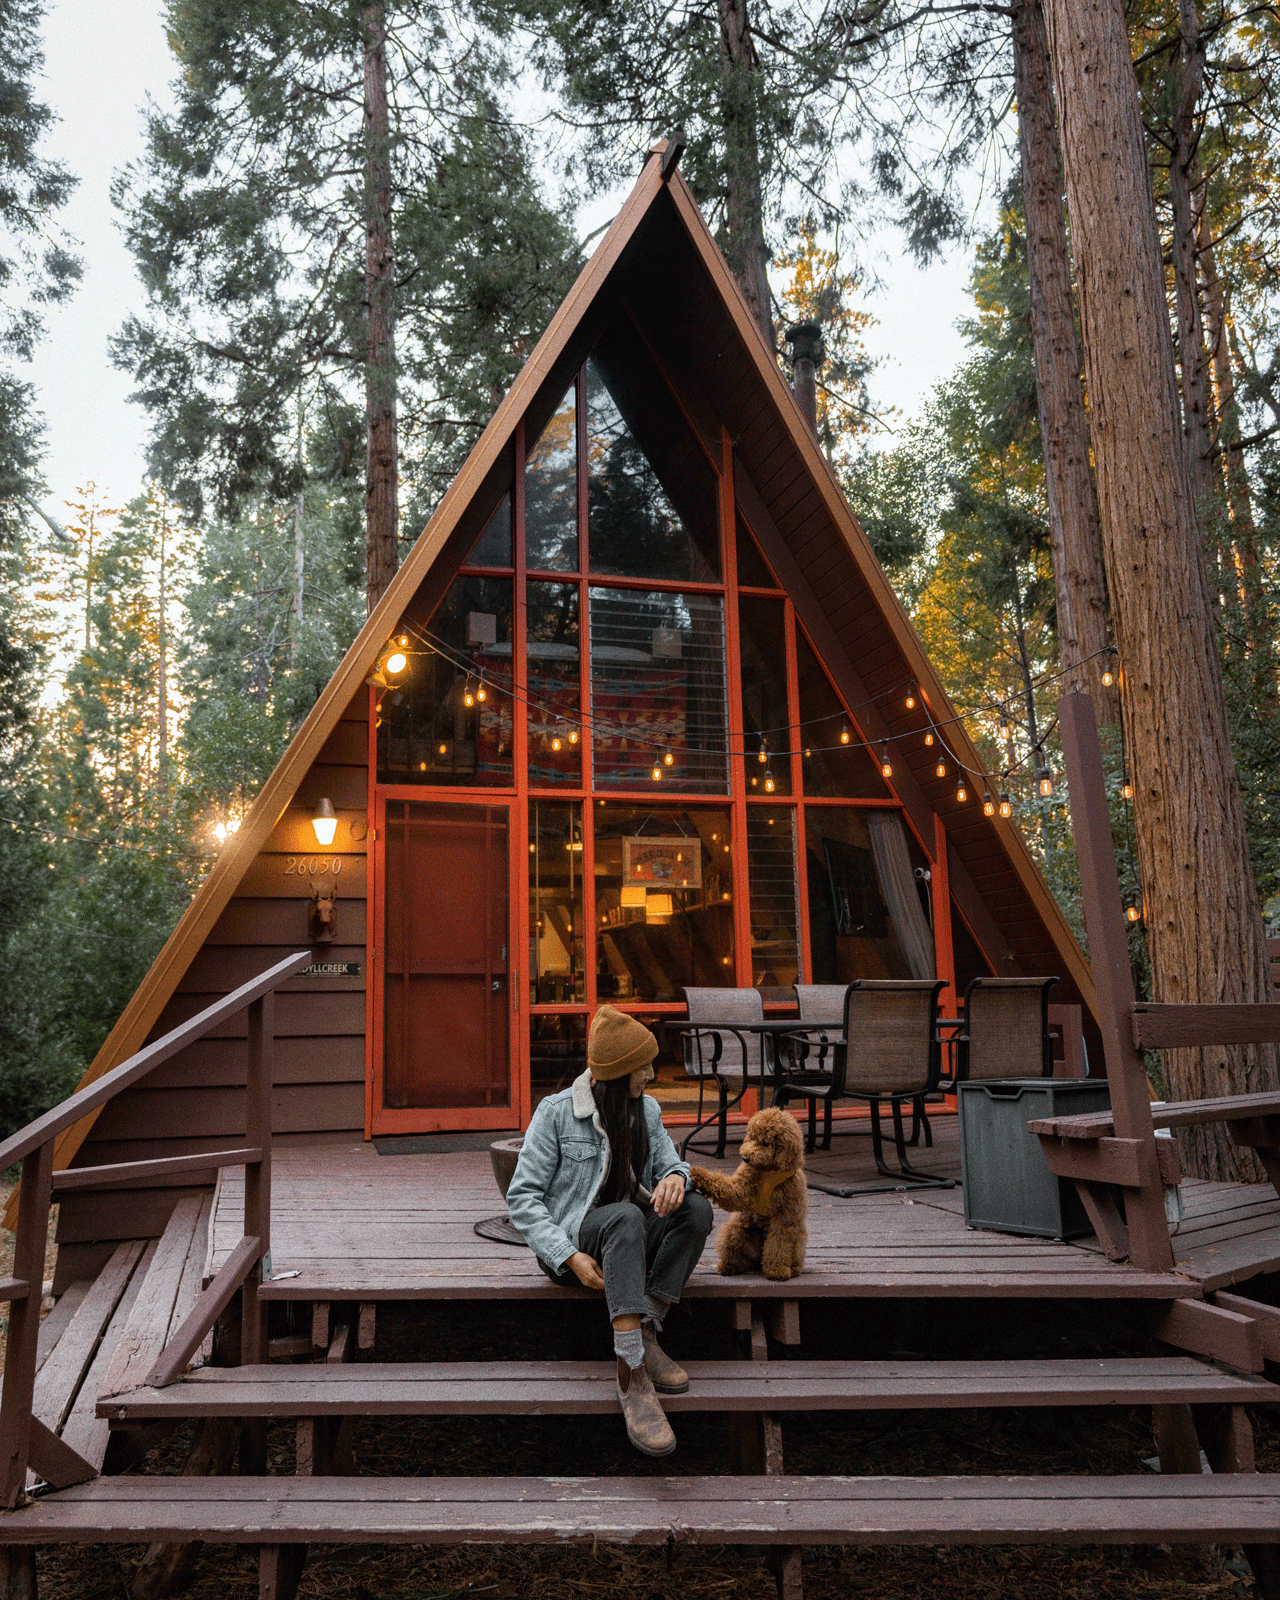 A person wearing a hat and jacket sits on the wooden steps of an A-frame cabin in a forest, petting a dog. The cabin has large windows and string lights hanging around the front porch area. Tall trees surround the cabin, creating a serene and cozy atmosphere.